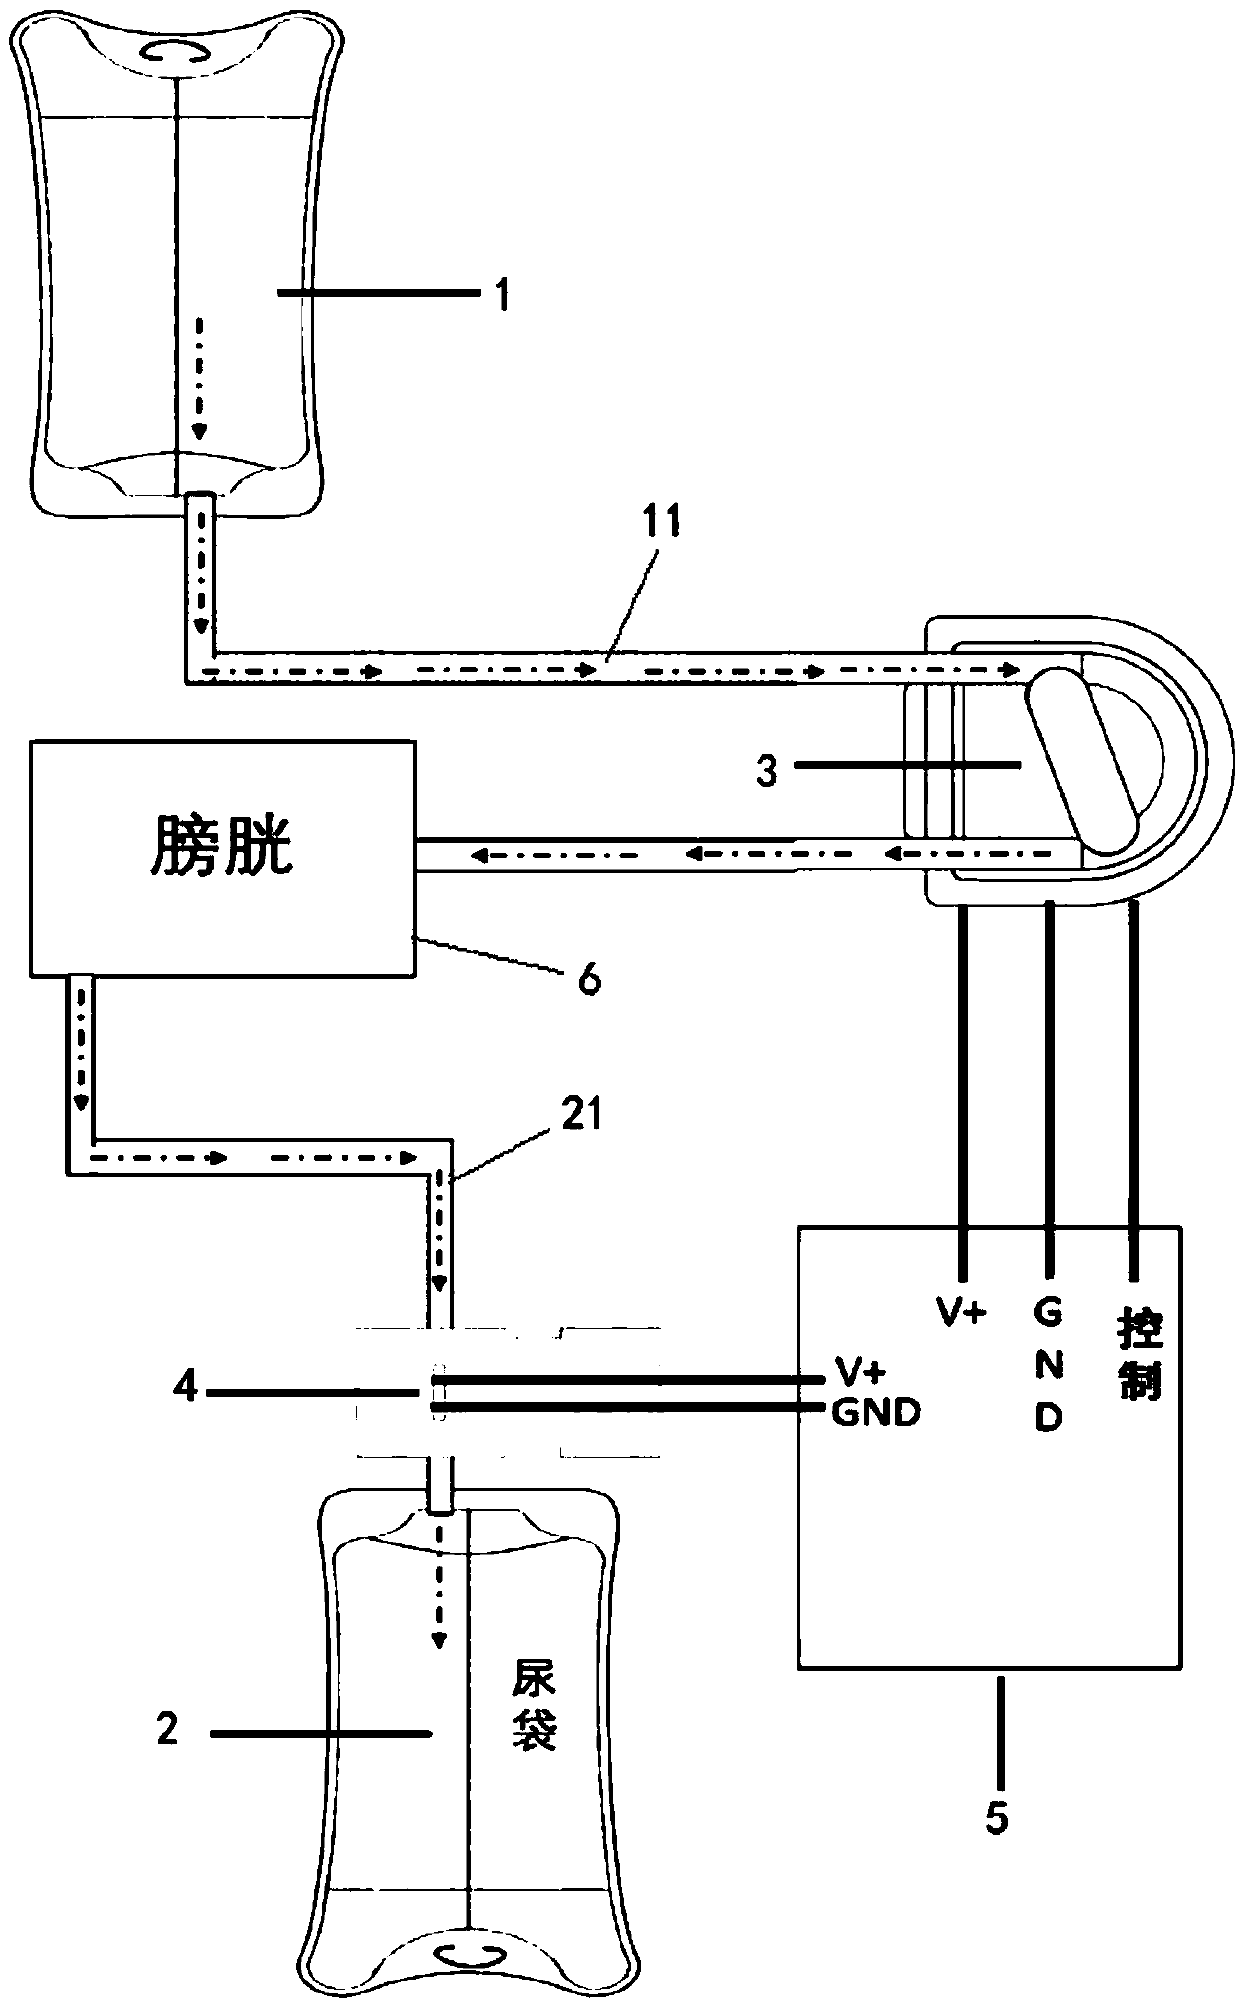 Urinary bladder flushing device and blood concentration detection device